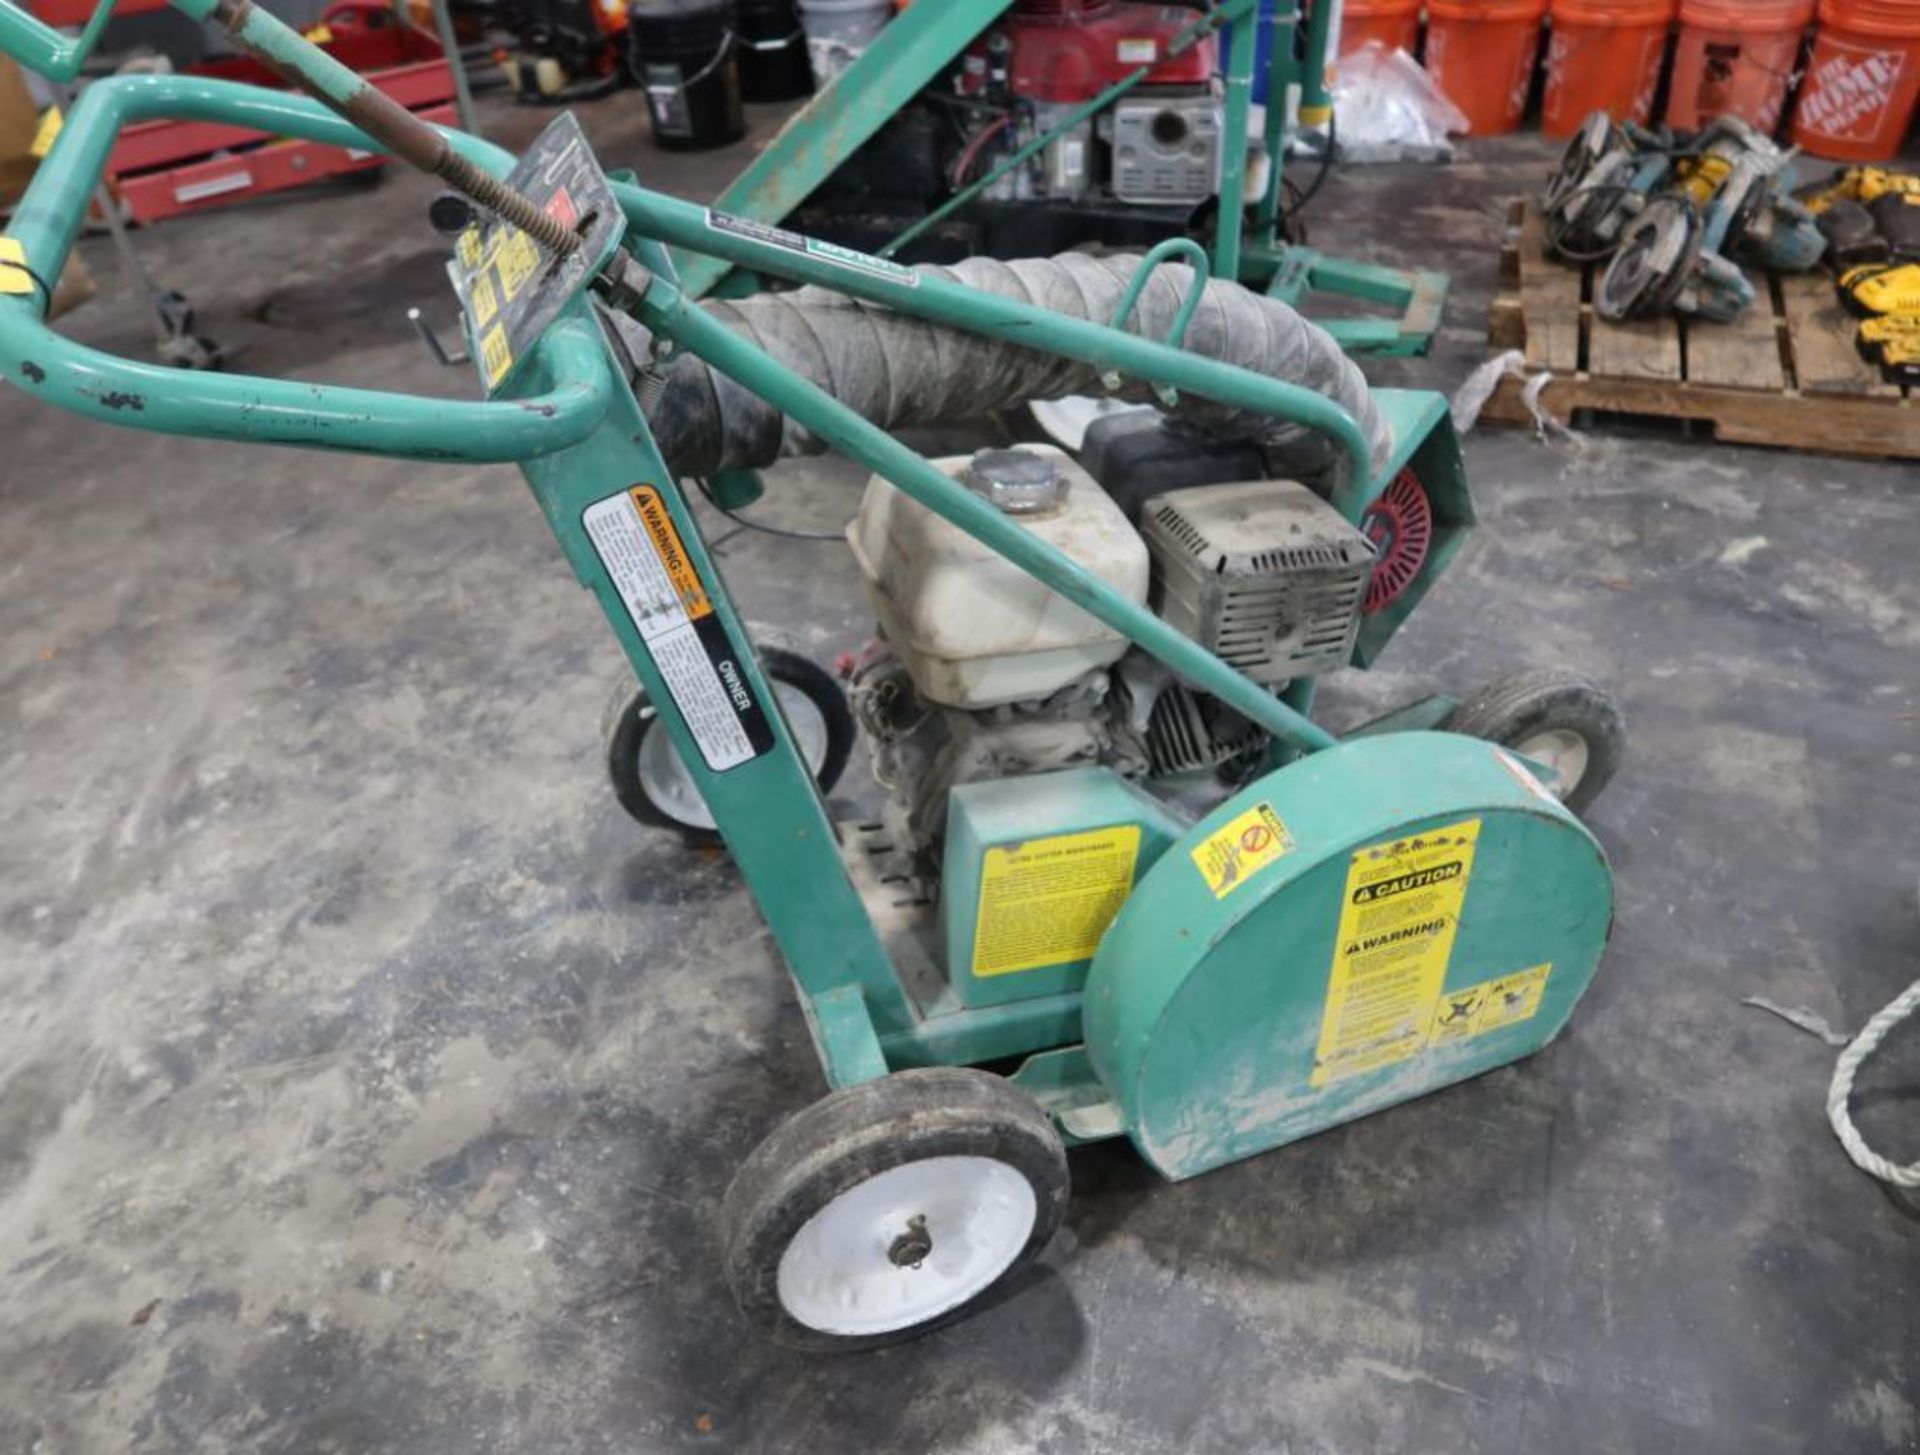 Garlock Ultra Cutter Gas Roofing Saw, S/N 98430 - Image 2 of 4